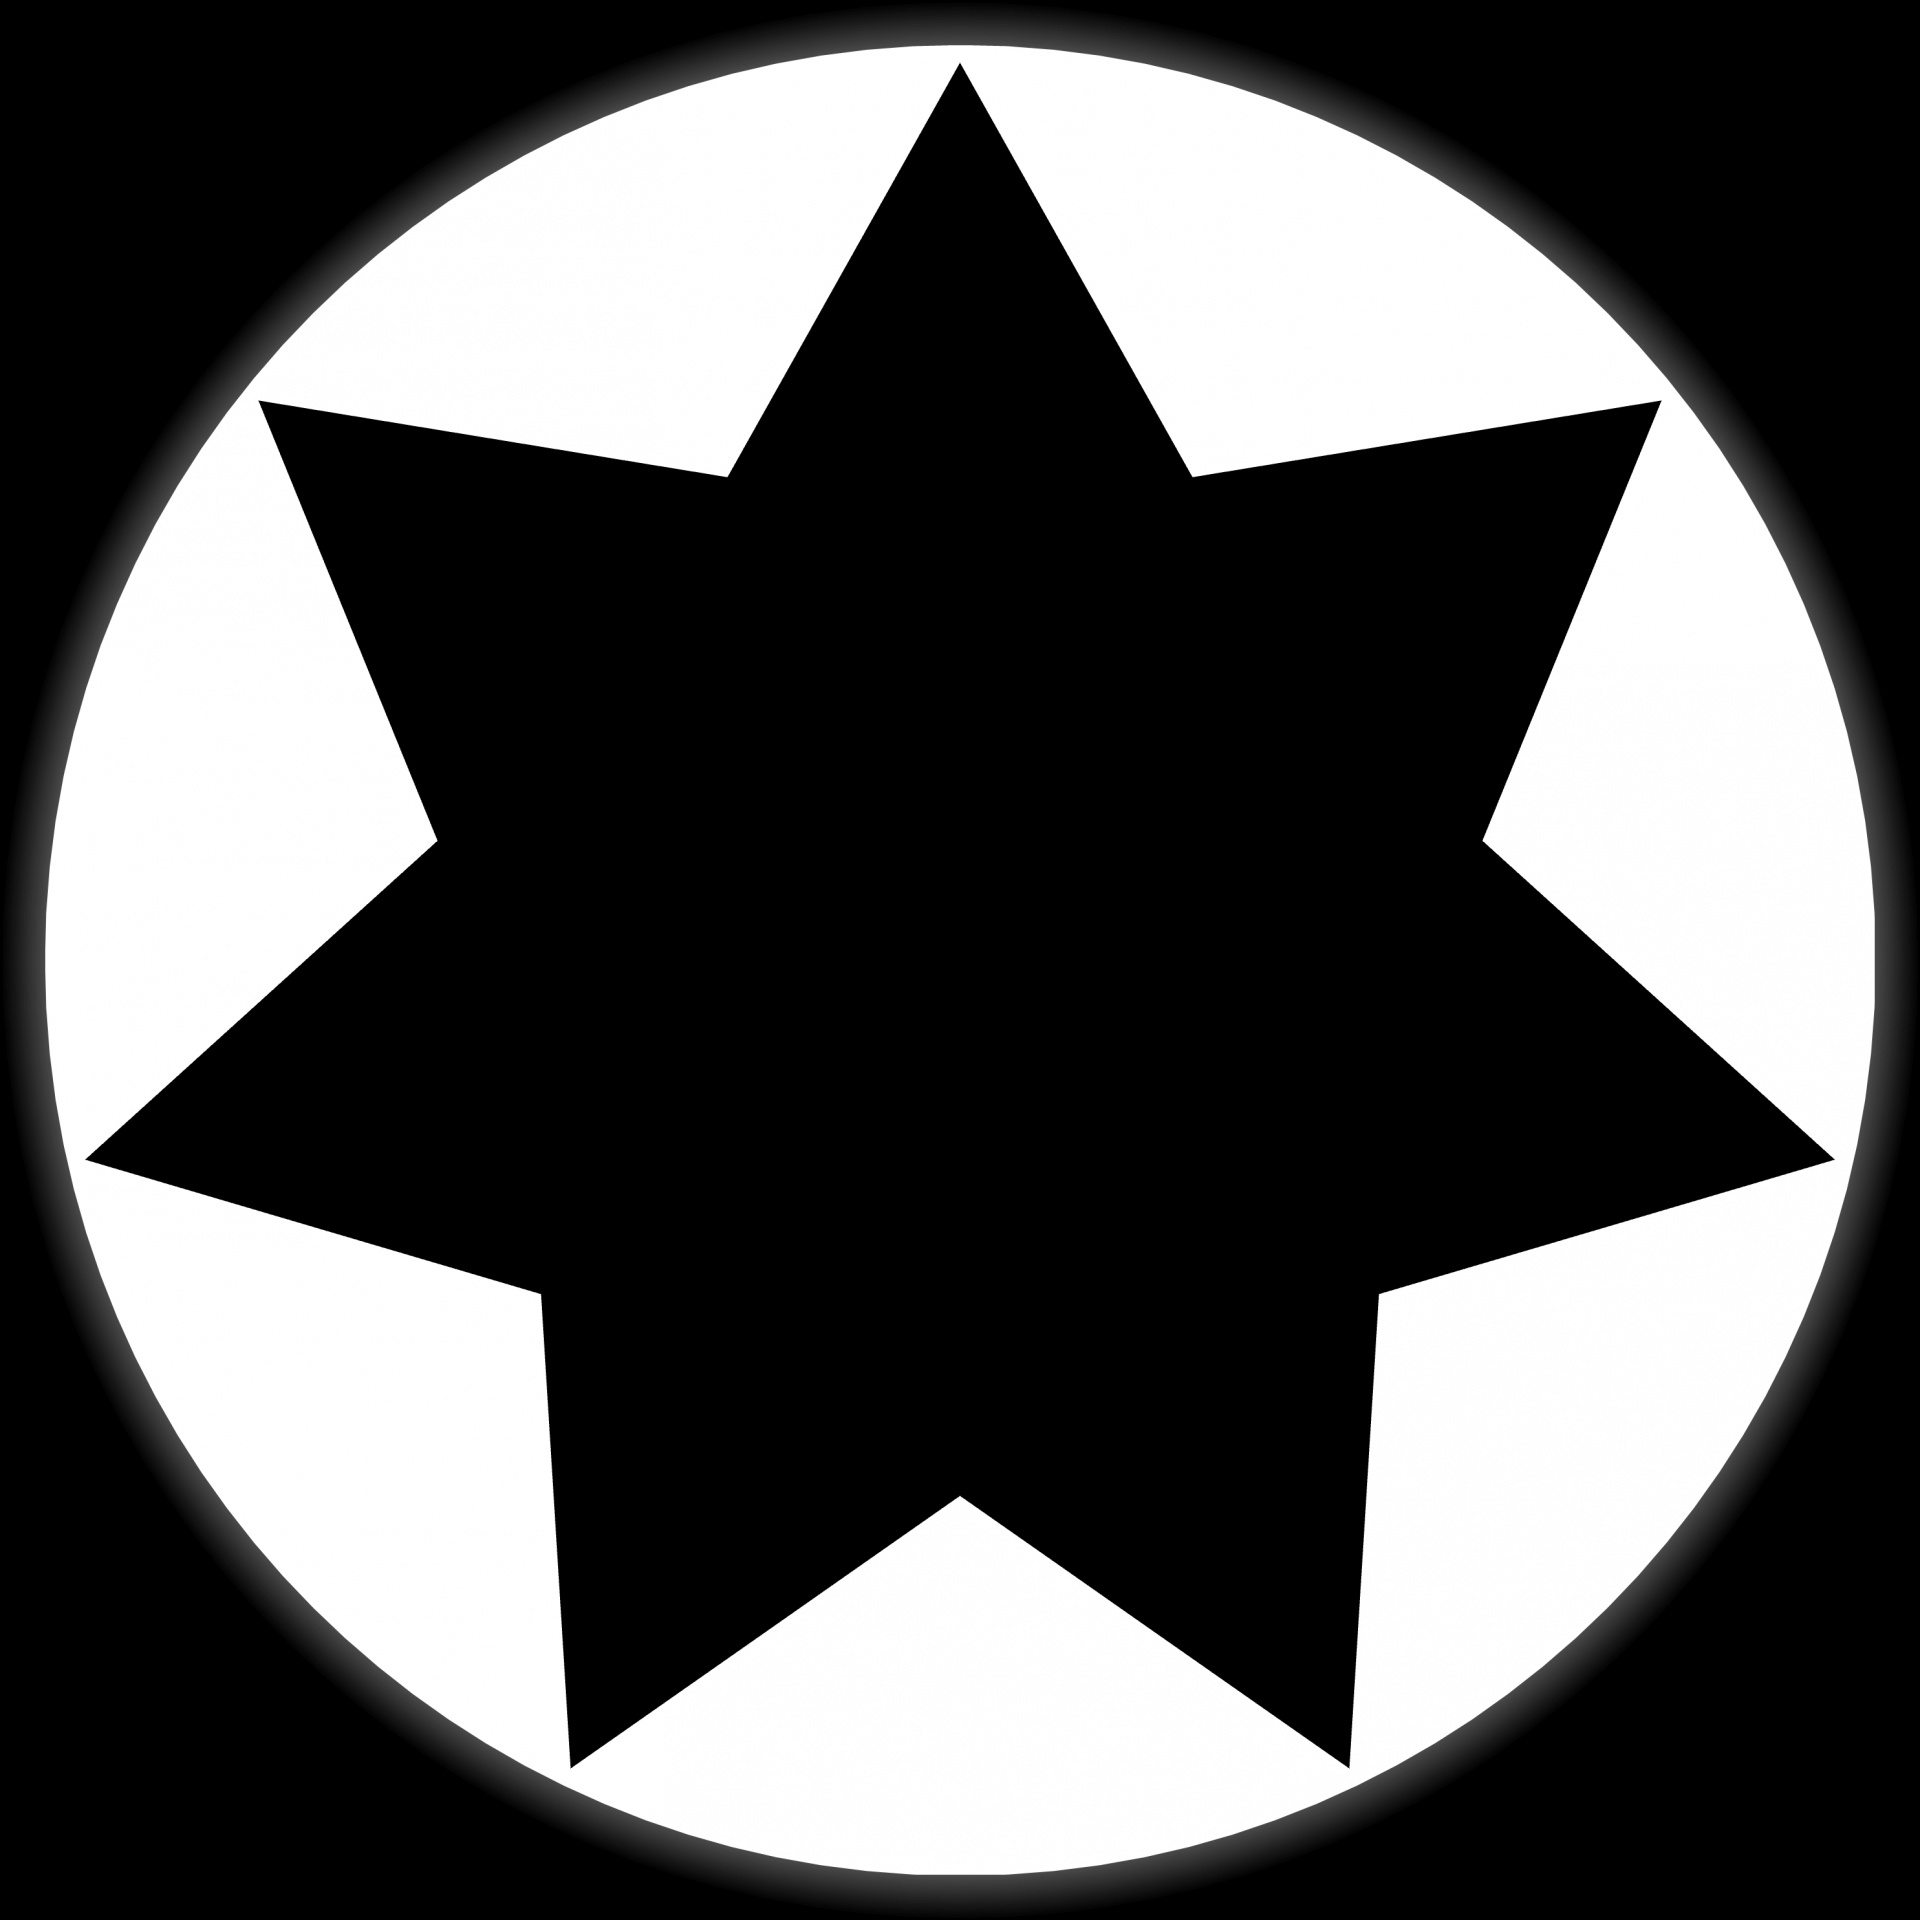 Six-pointed Star In A Circle